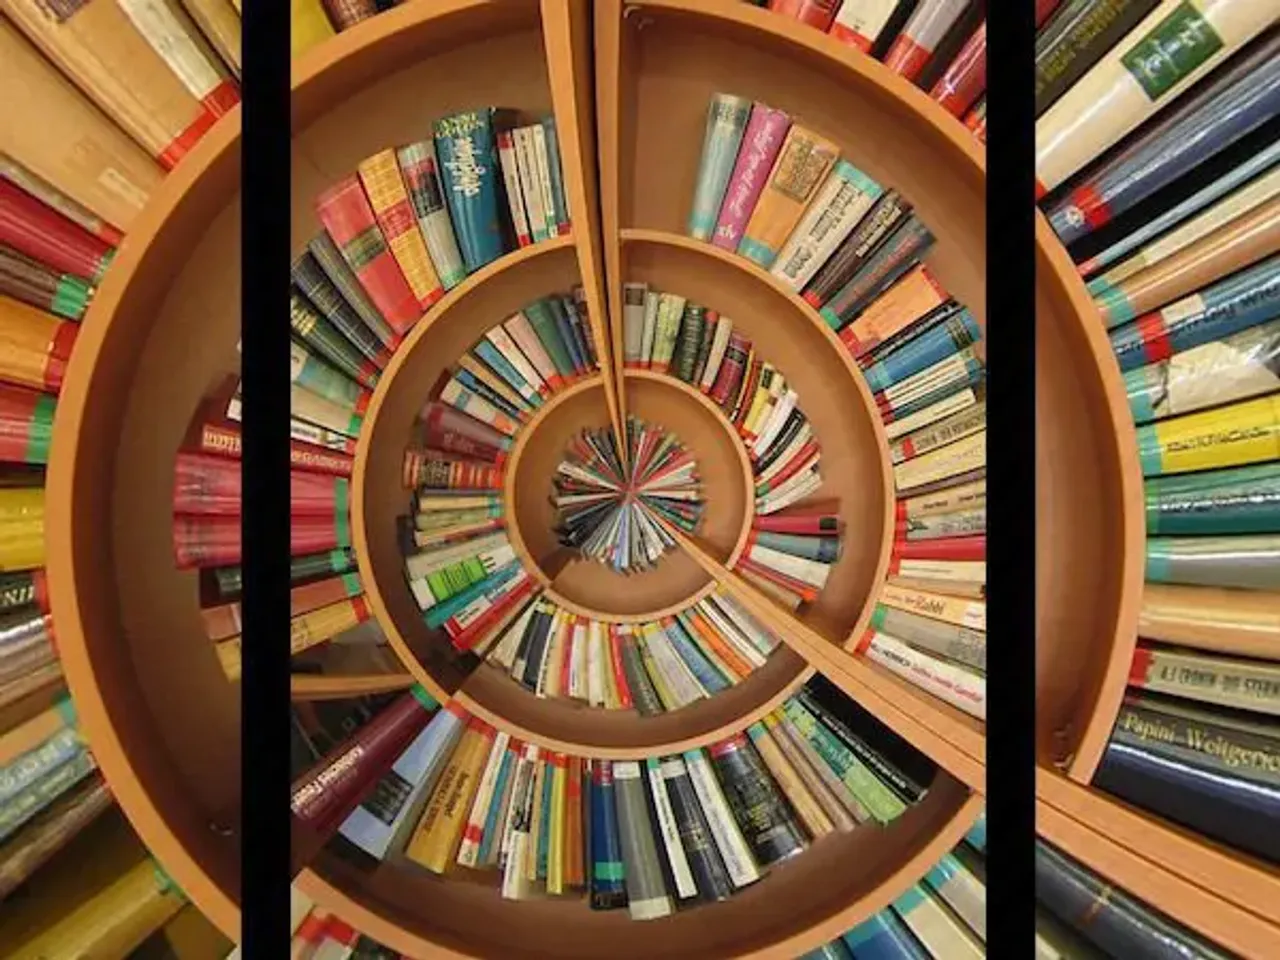 Bedside book has new meaning at hotel where you sleep on bookshelves